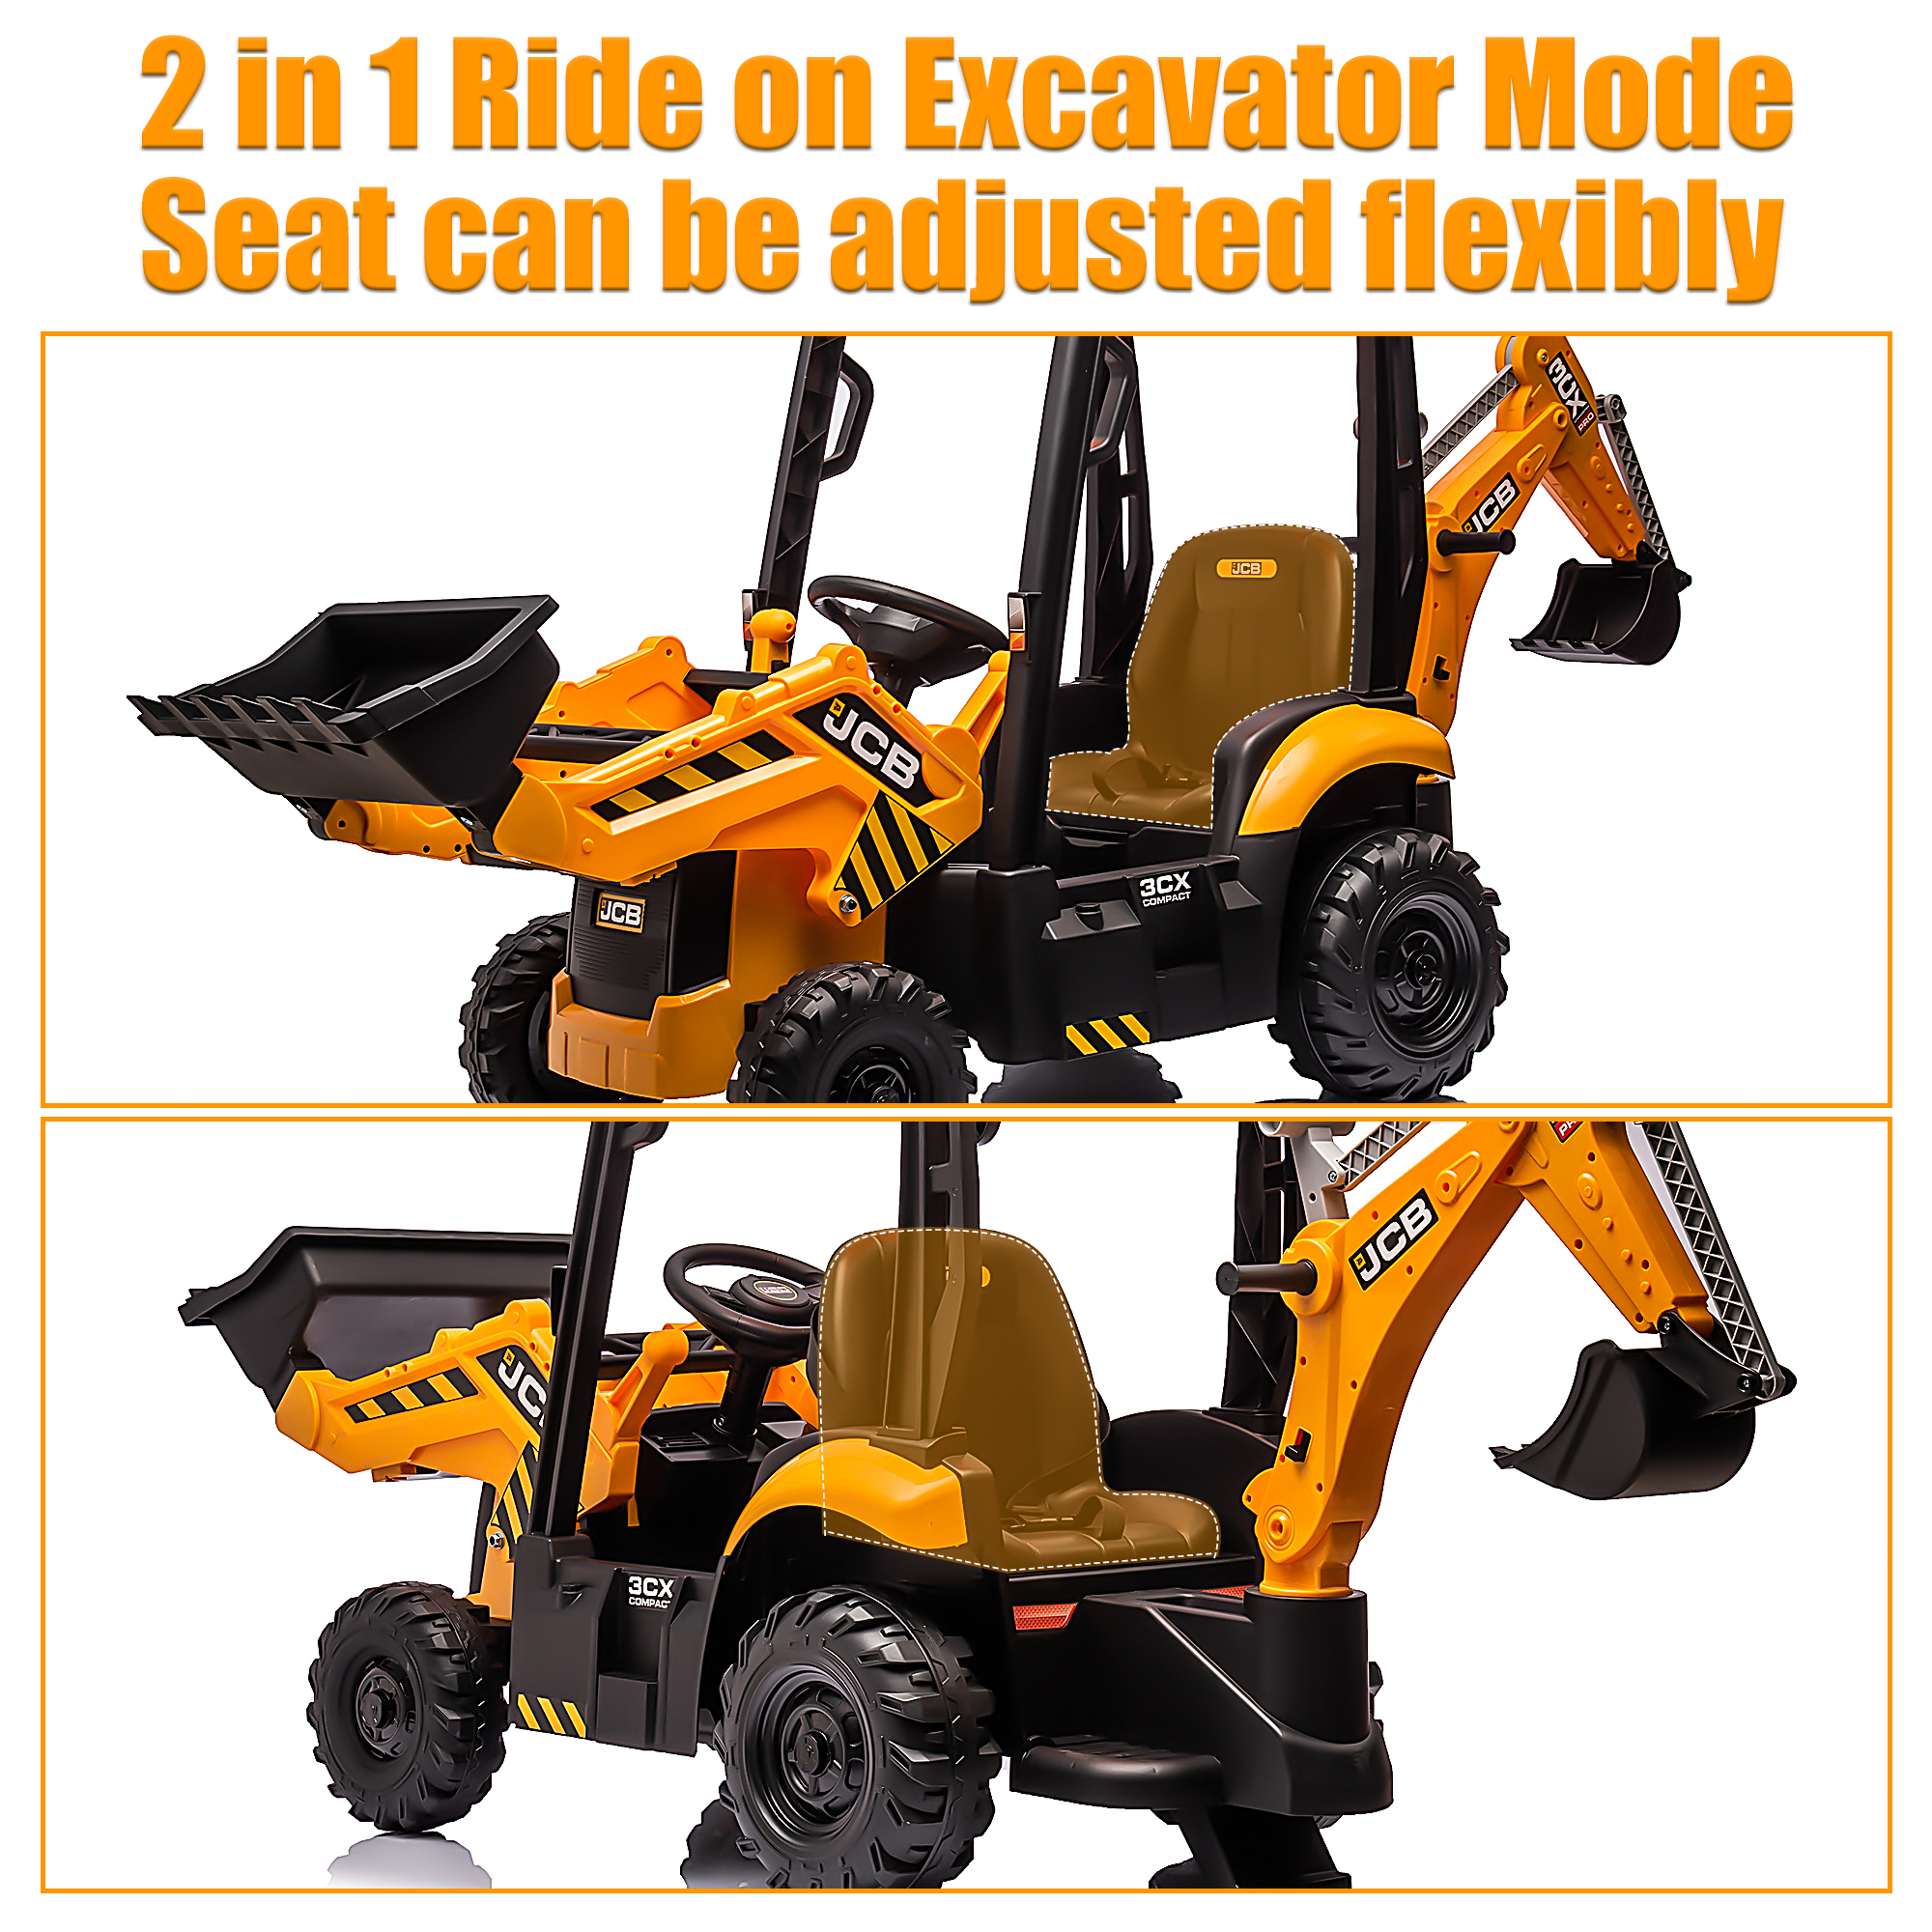 JCB 12V Ride on Excavator Digger, 4in1 Kids Ride on Toy with Remote Control, Powered Electric Construction Tractor for 3-6 Years Old Boys Girls Toddlers, Ajustable Front and Back Loader, Yellow - image 5 of 10